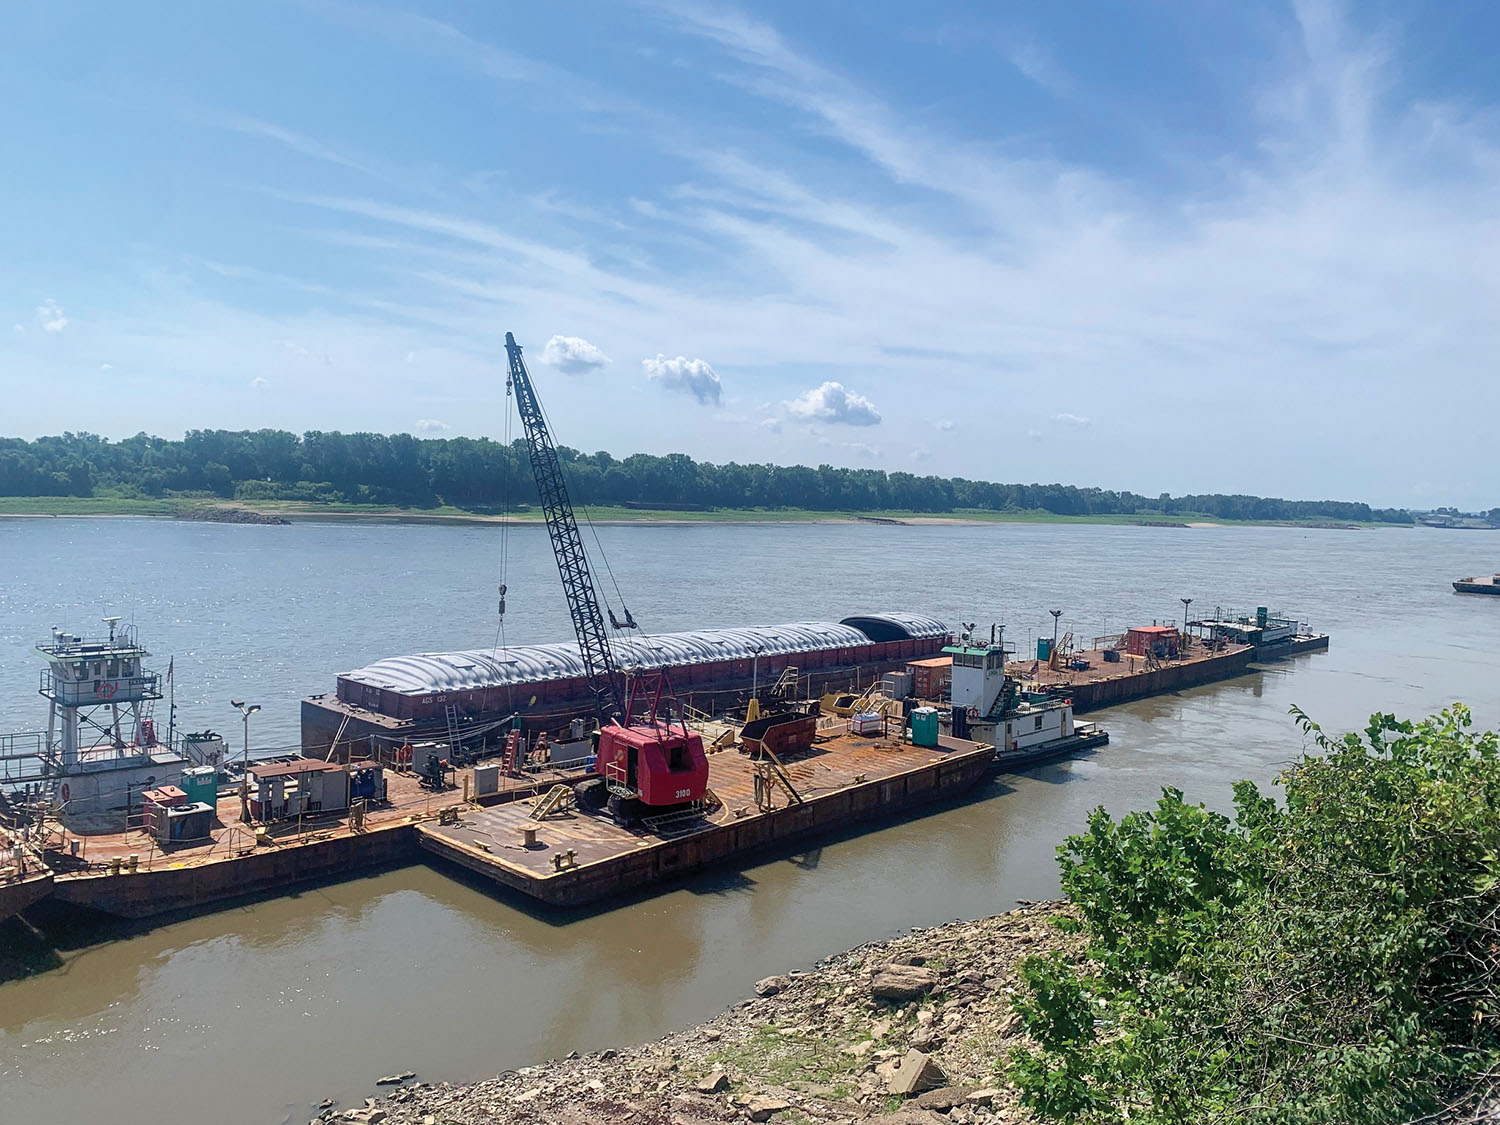 Part of the CGB St. Louis Shipyard south of St. Louis on the Mississippi River. CGB purchased the yard from JB Marine. (Photo courtesy of CGB)